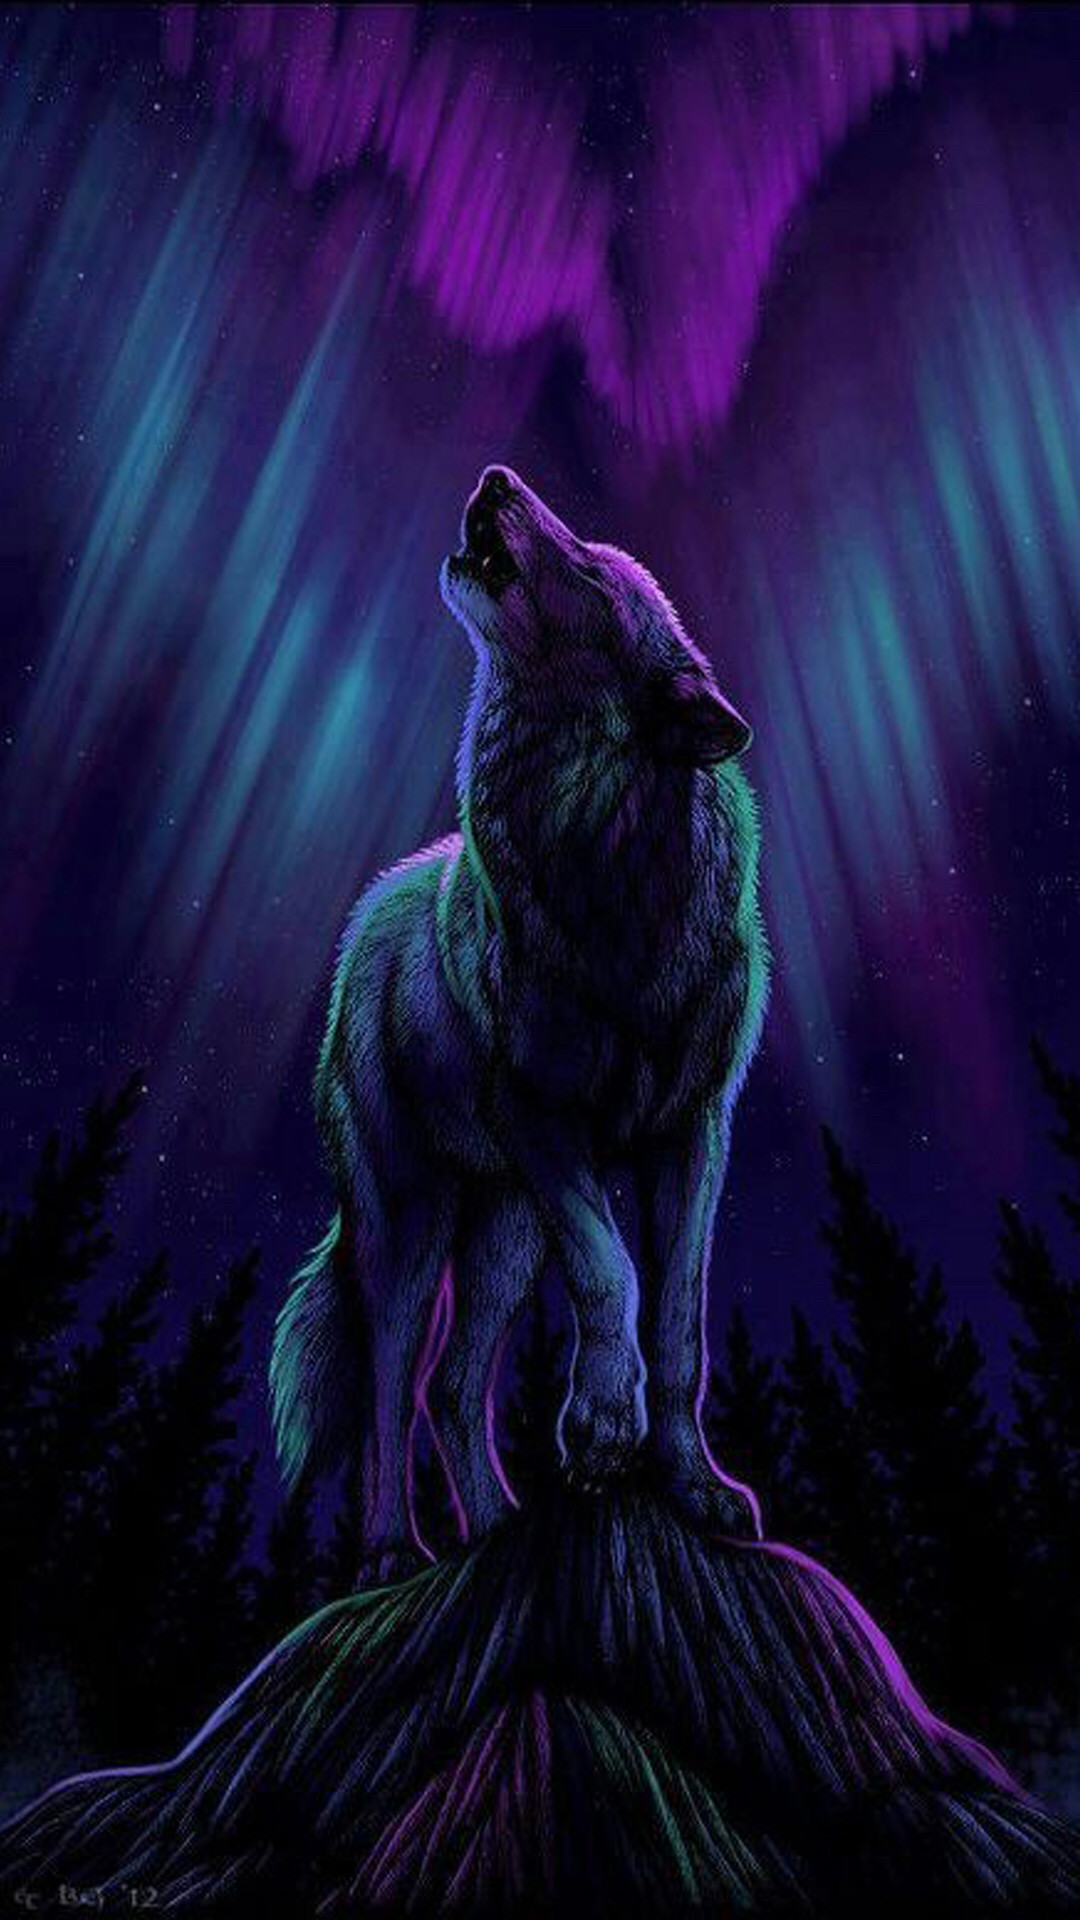 1080x1920 Wolf Art - Purples & Blues of Night. This would be a great tattoo!